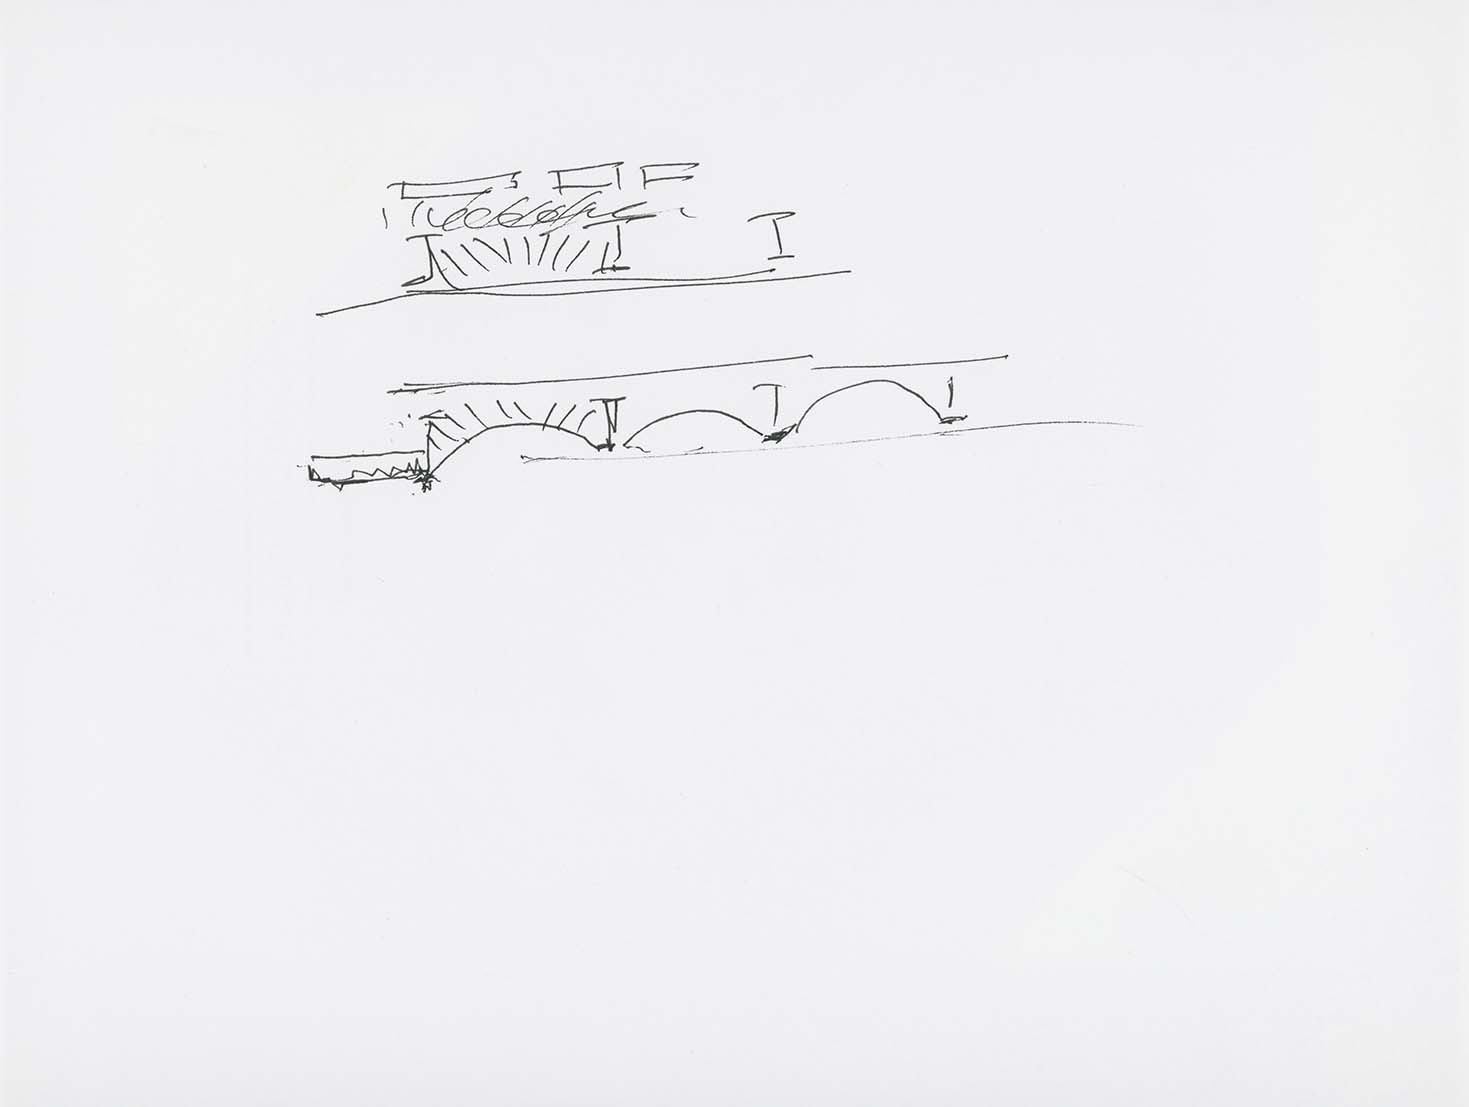 Architectural sketch by Hisham Munir showing the traditional "jack arch" structure (top) and his refined version below.&nbsp;